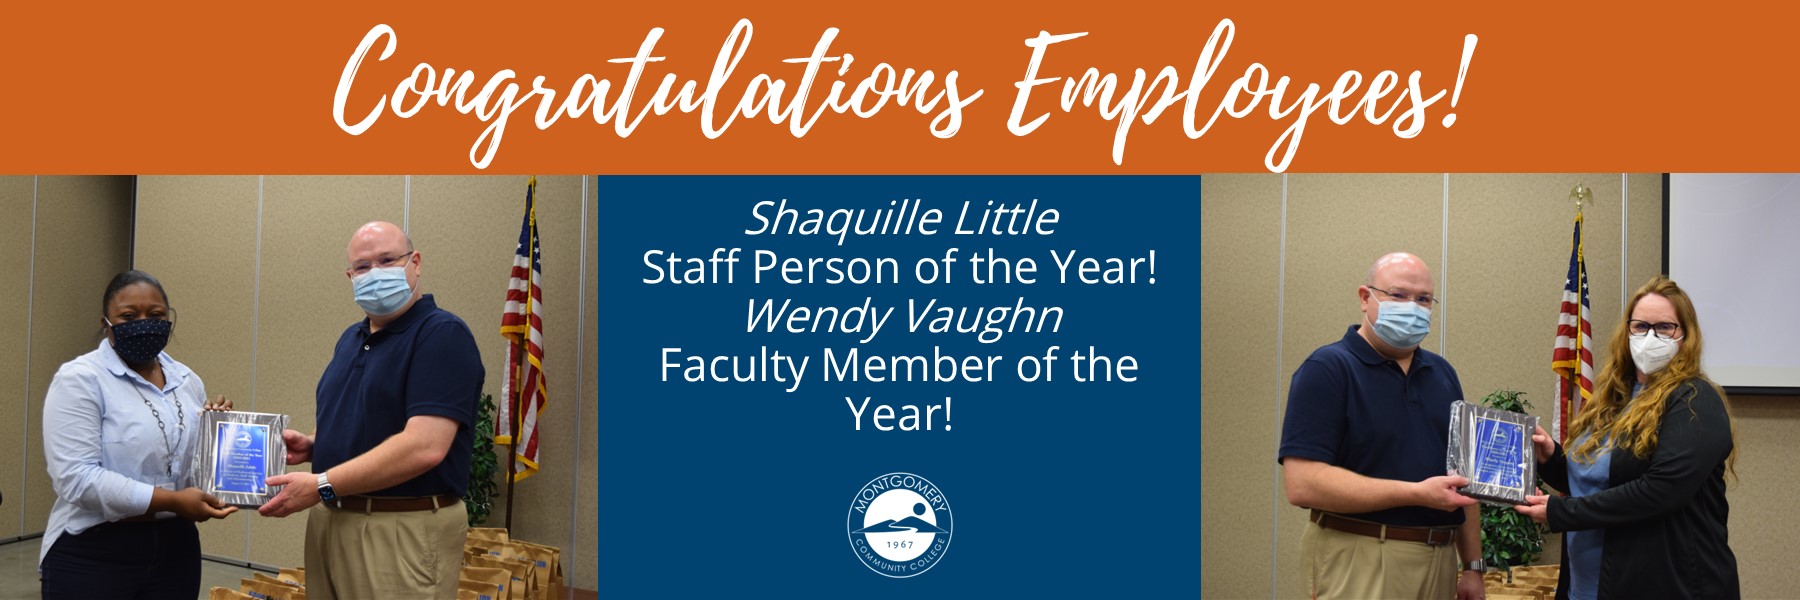 Congratualtions employees! Shaquille Little staff person of the year! Wendy Vaughn faculty member of the year!